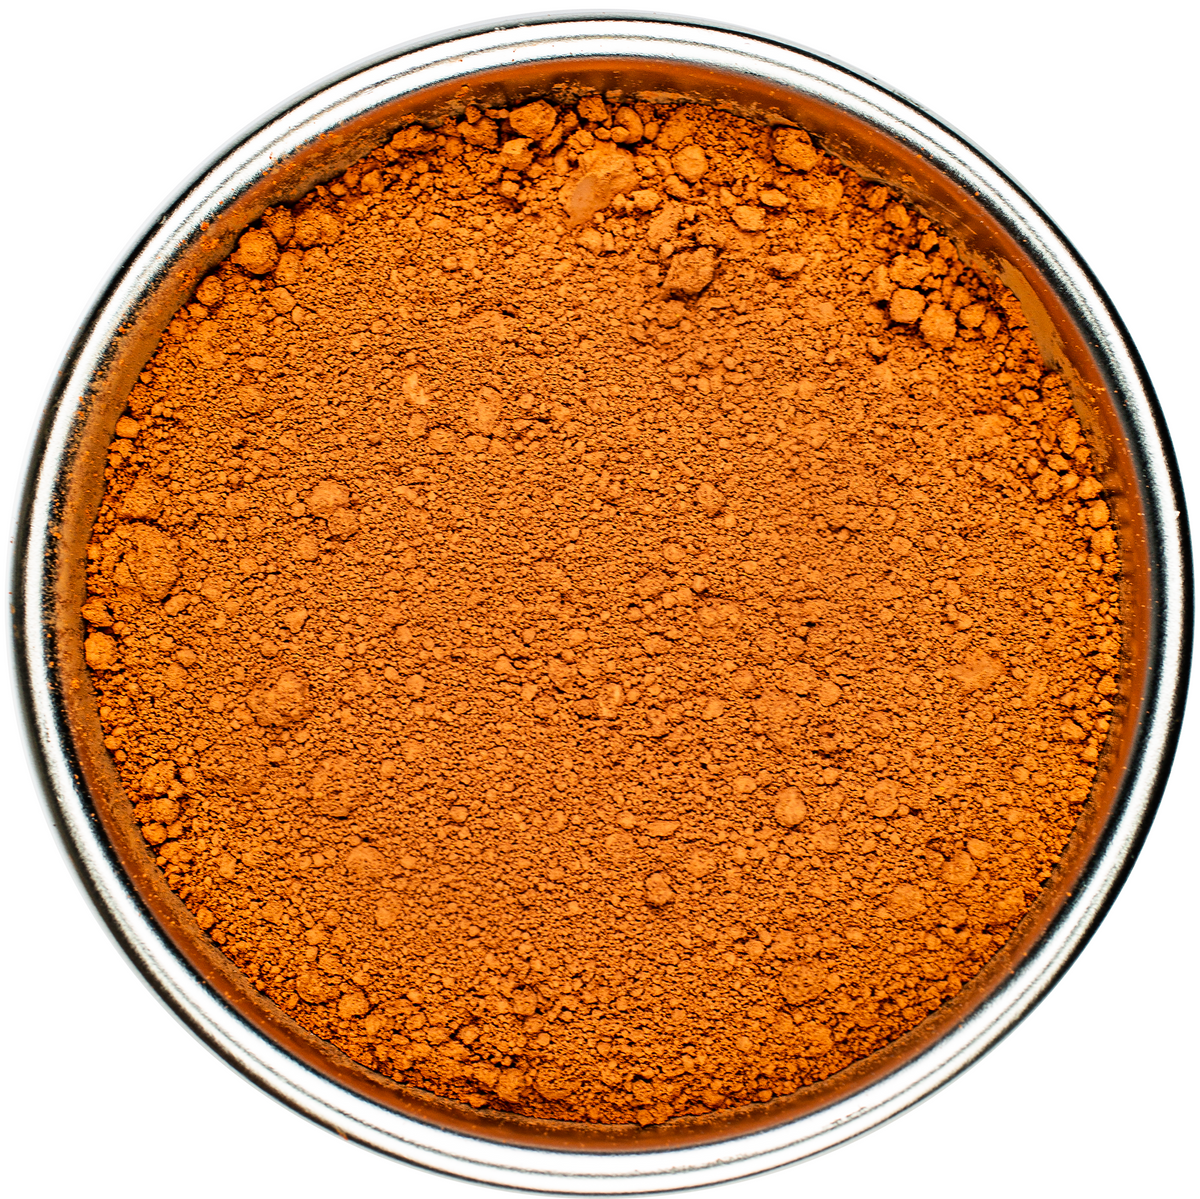 Moroccan Red Clay – Herb'N Eden